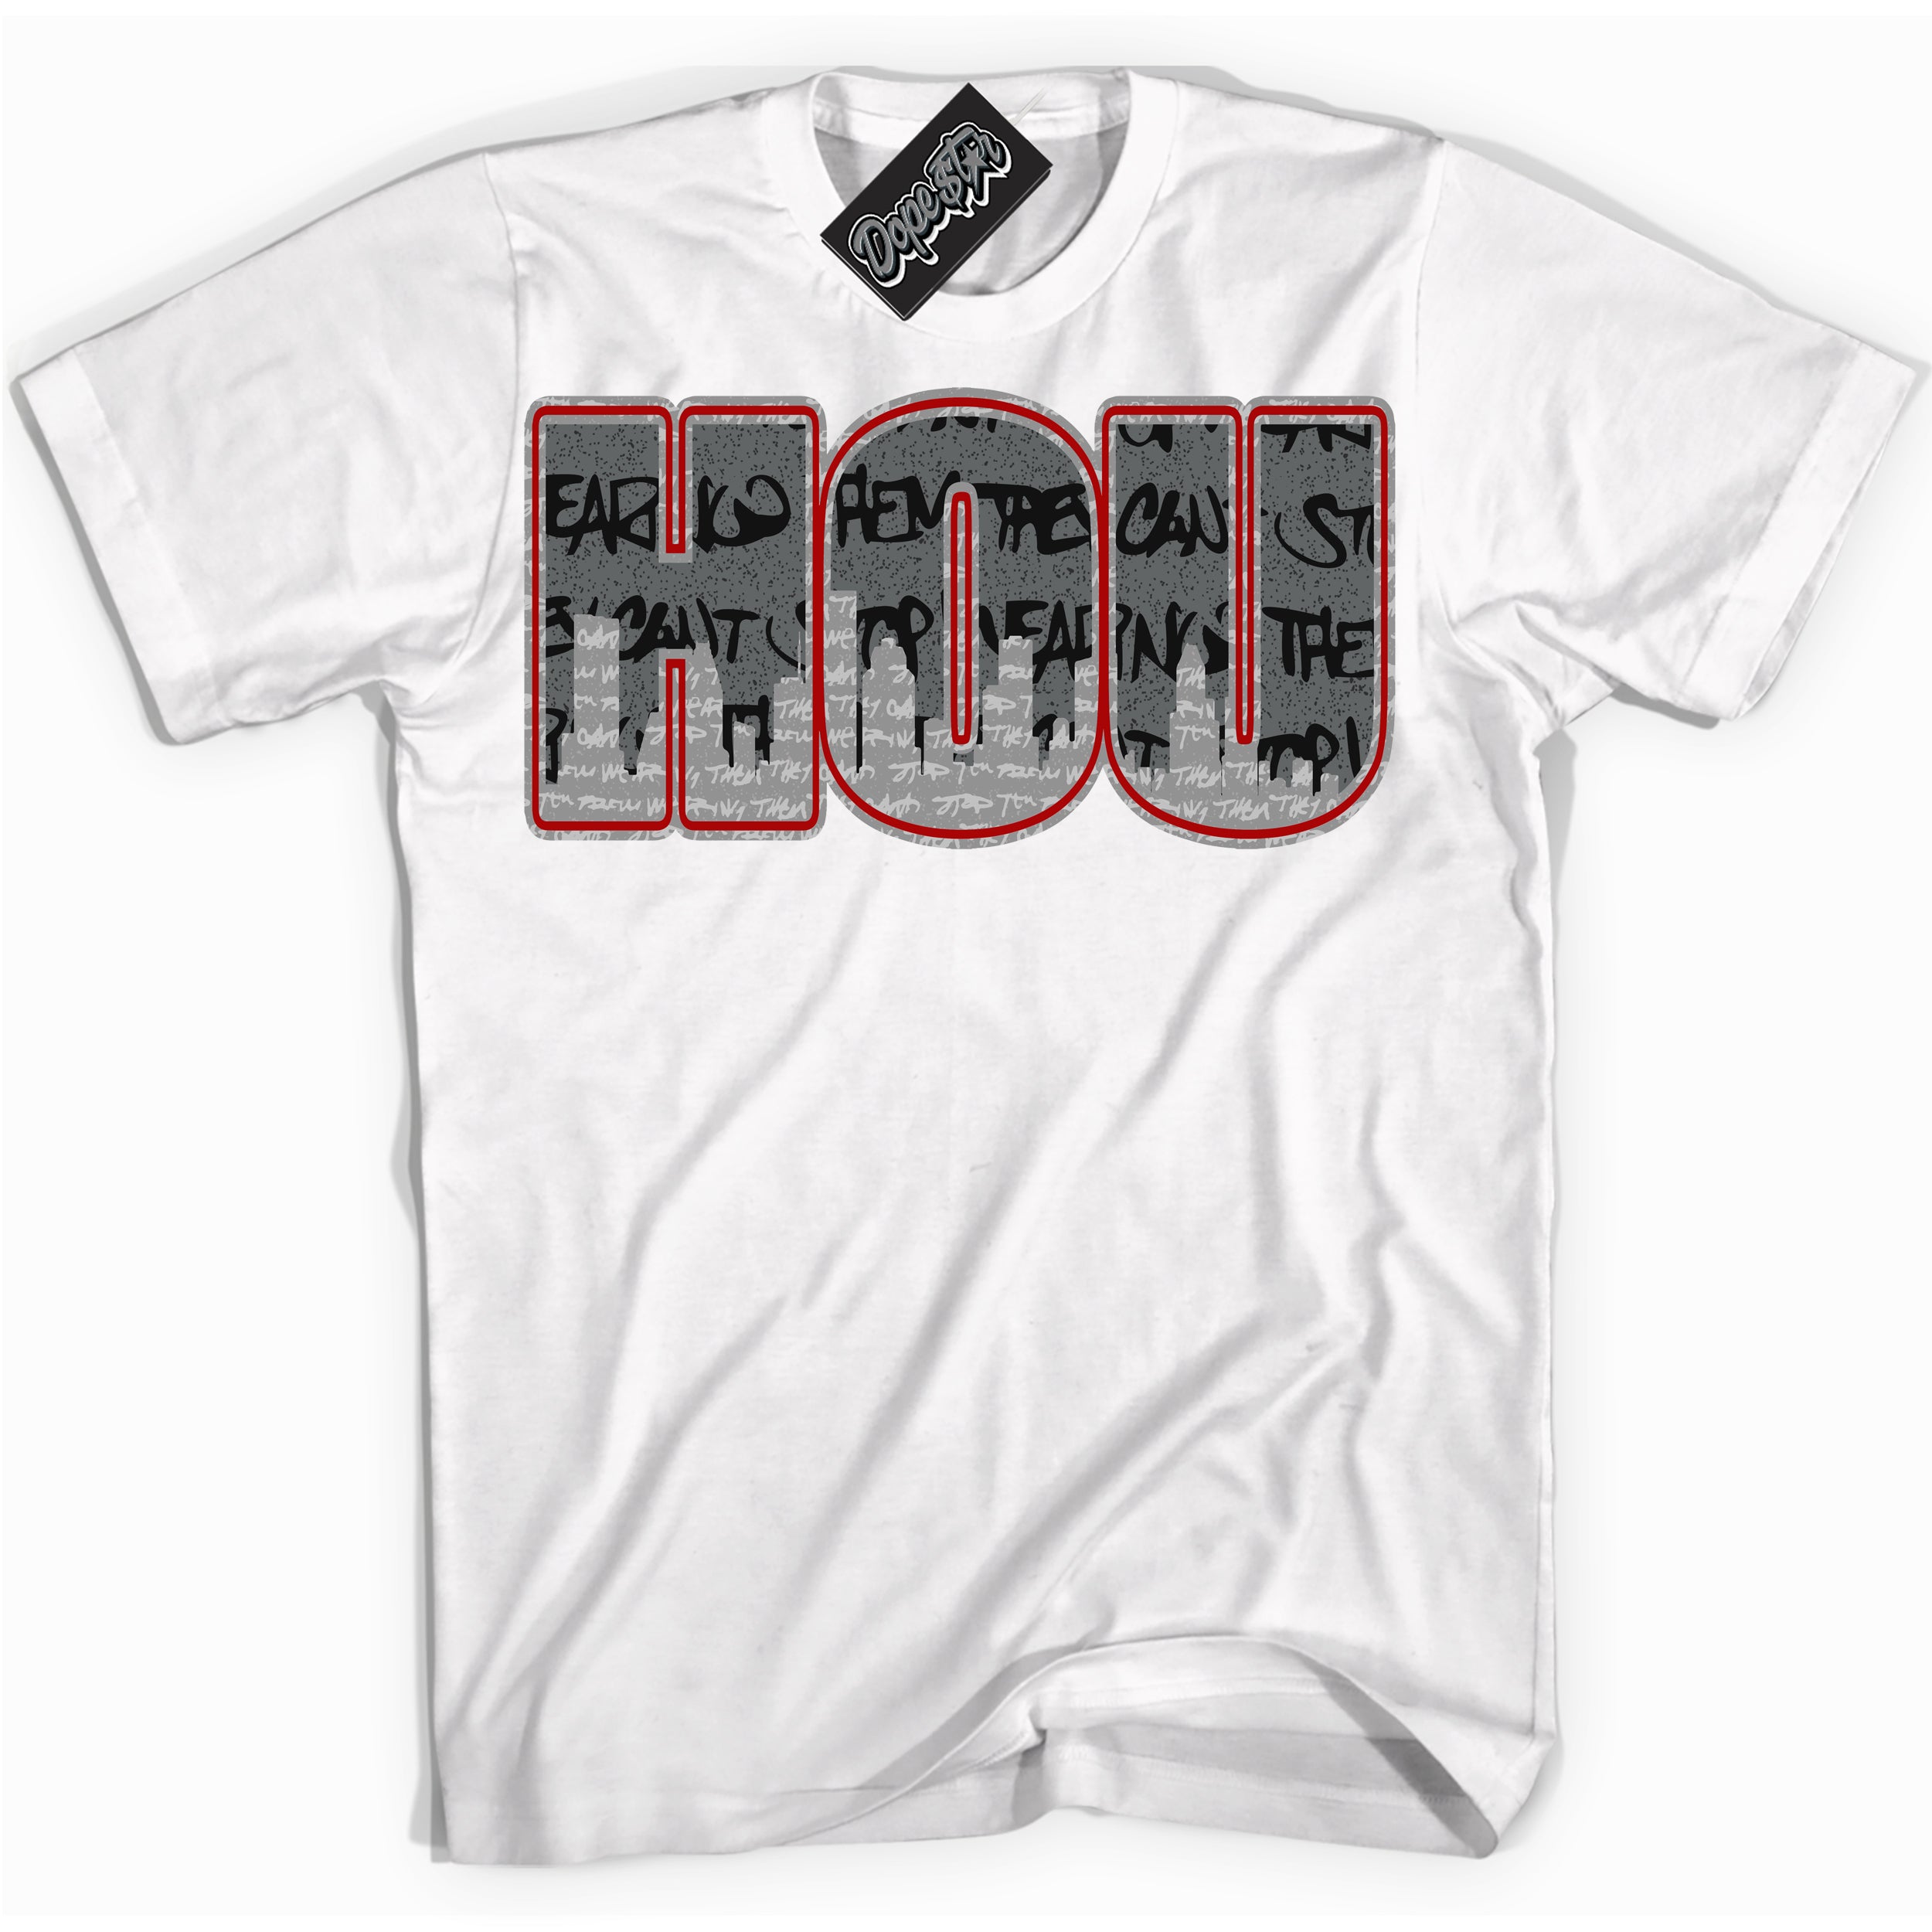 Cool White Shirt with “ Houston ” design that perfectly matches Rebellionaire 1s Sneakers.